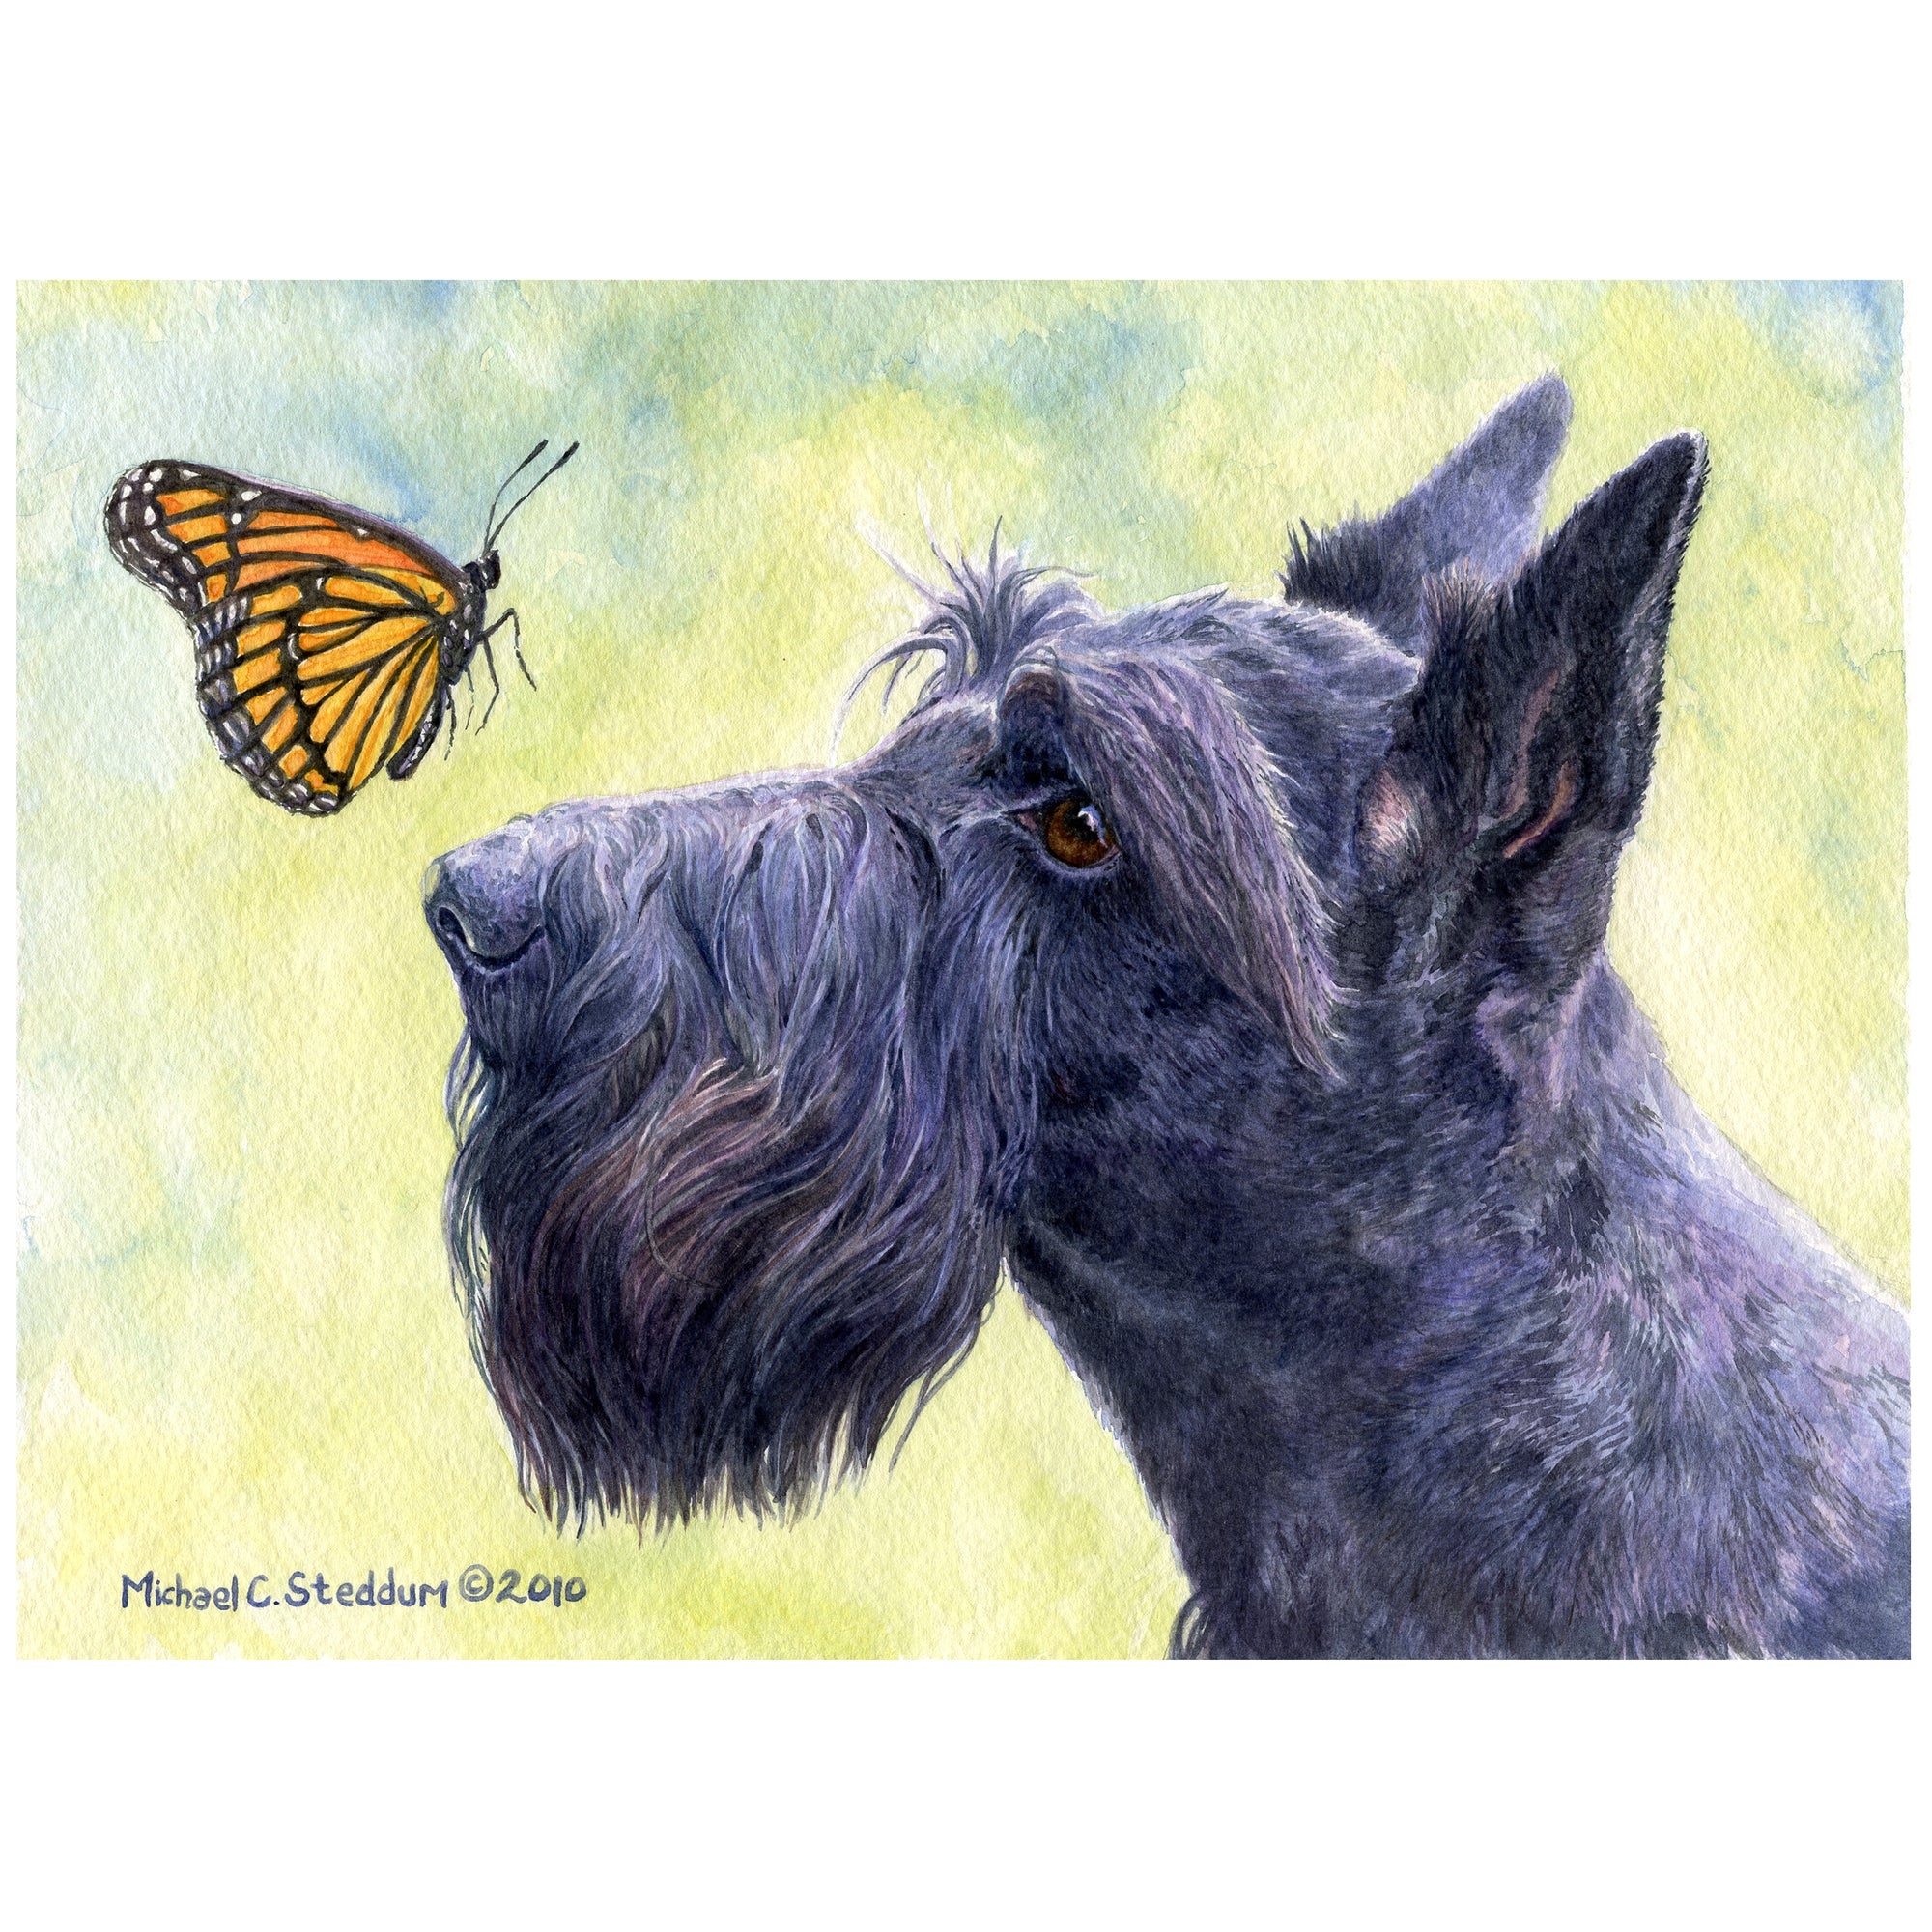 Scottish Terrier Art Reproduction Print - "Close Encounters" by Michael Steddum - Limited Edition Signed and Numbered Scottish Terrier Art Print - A Great Scottie Gift